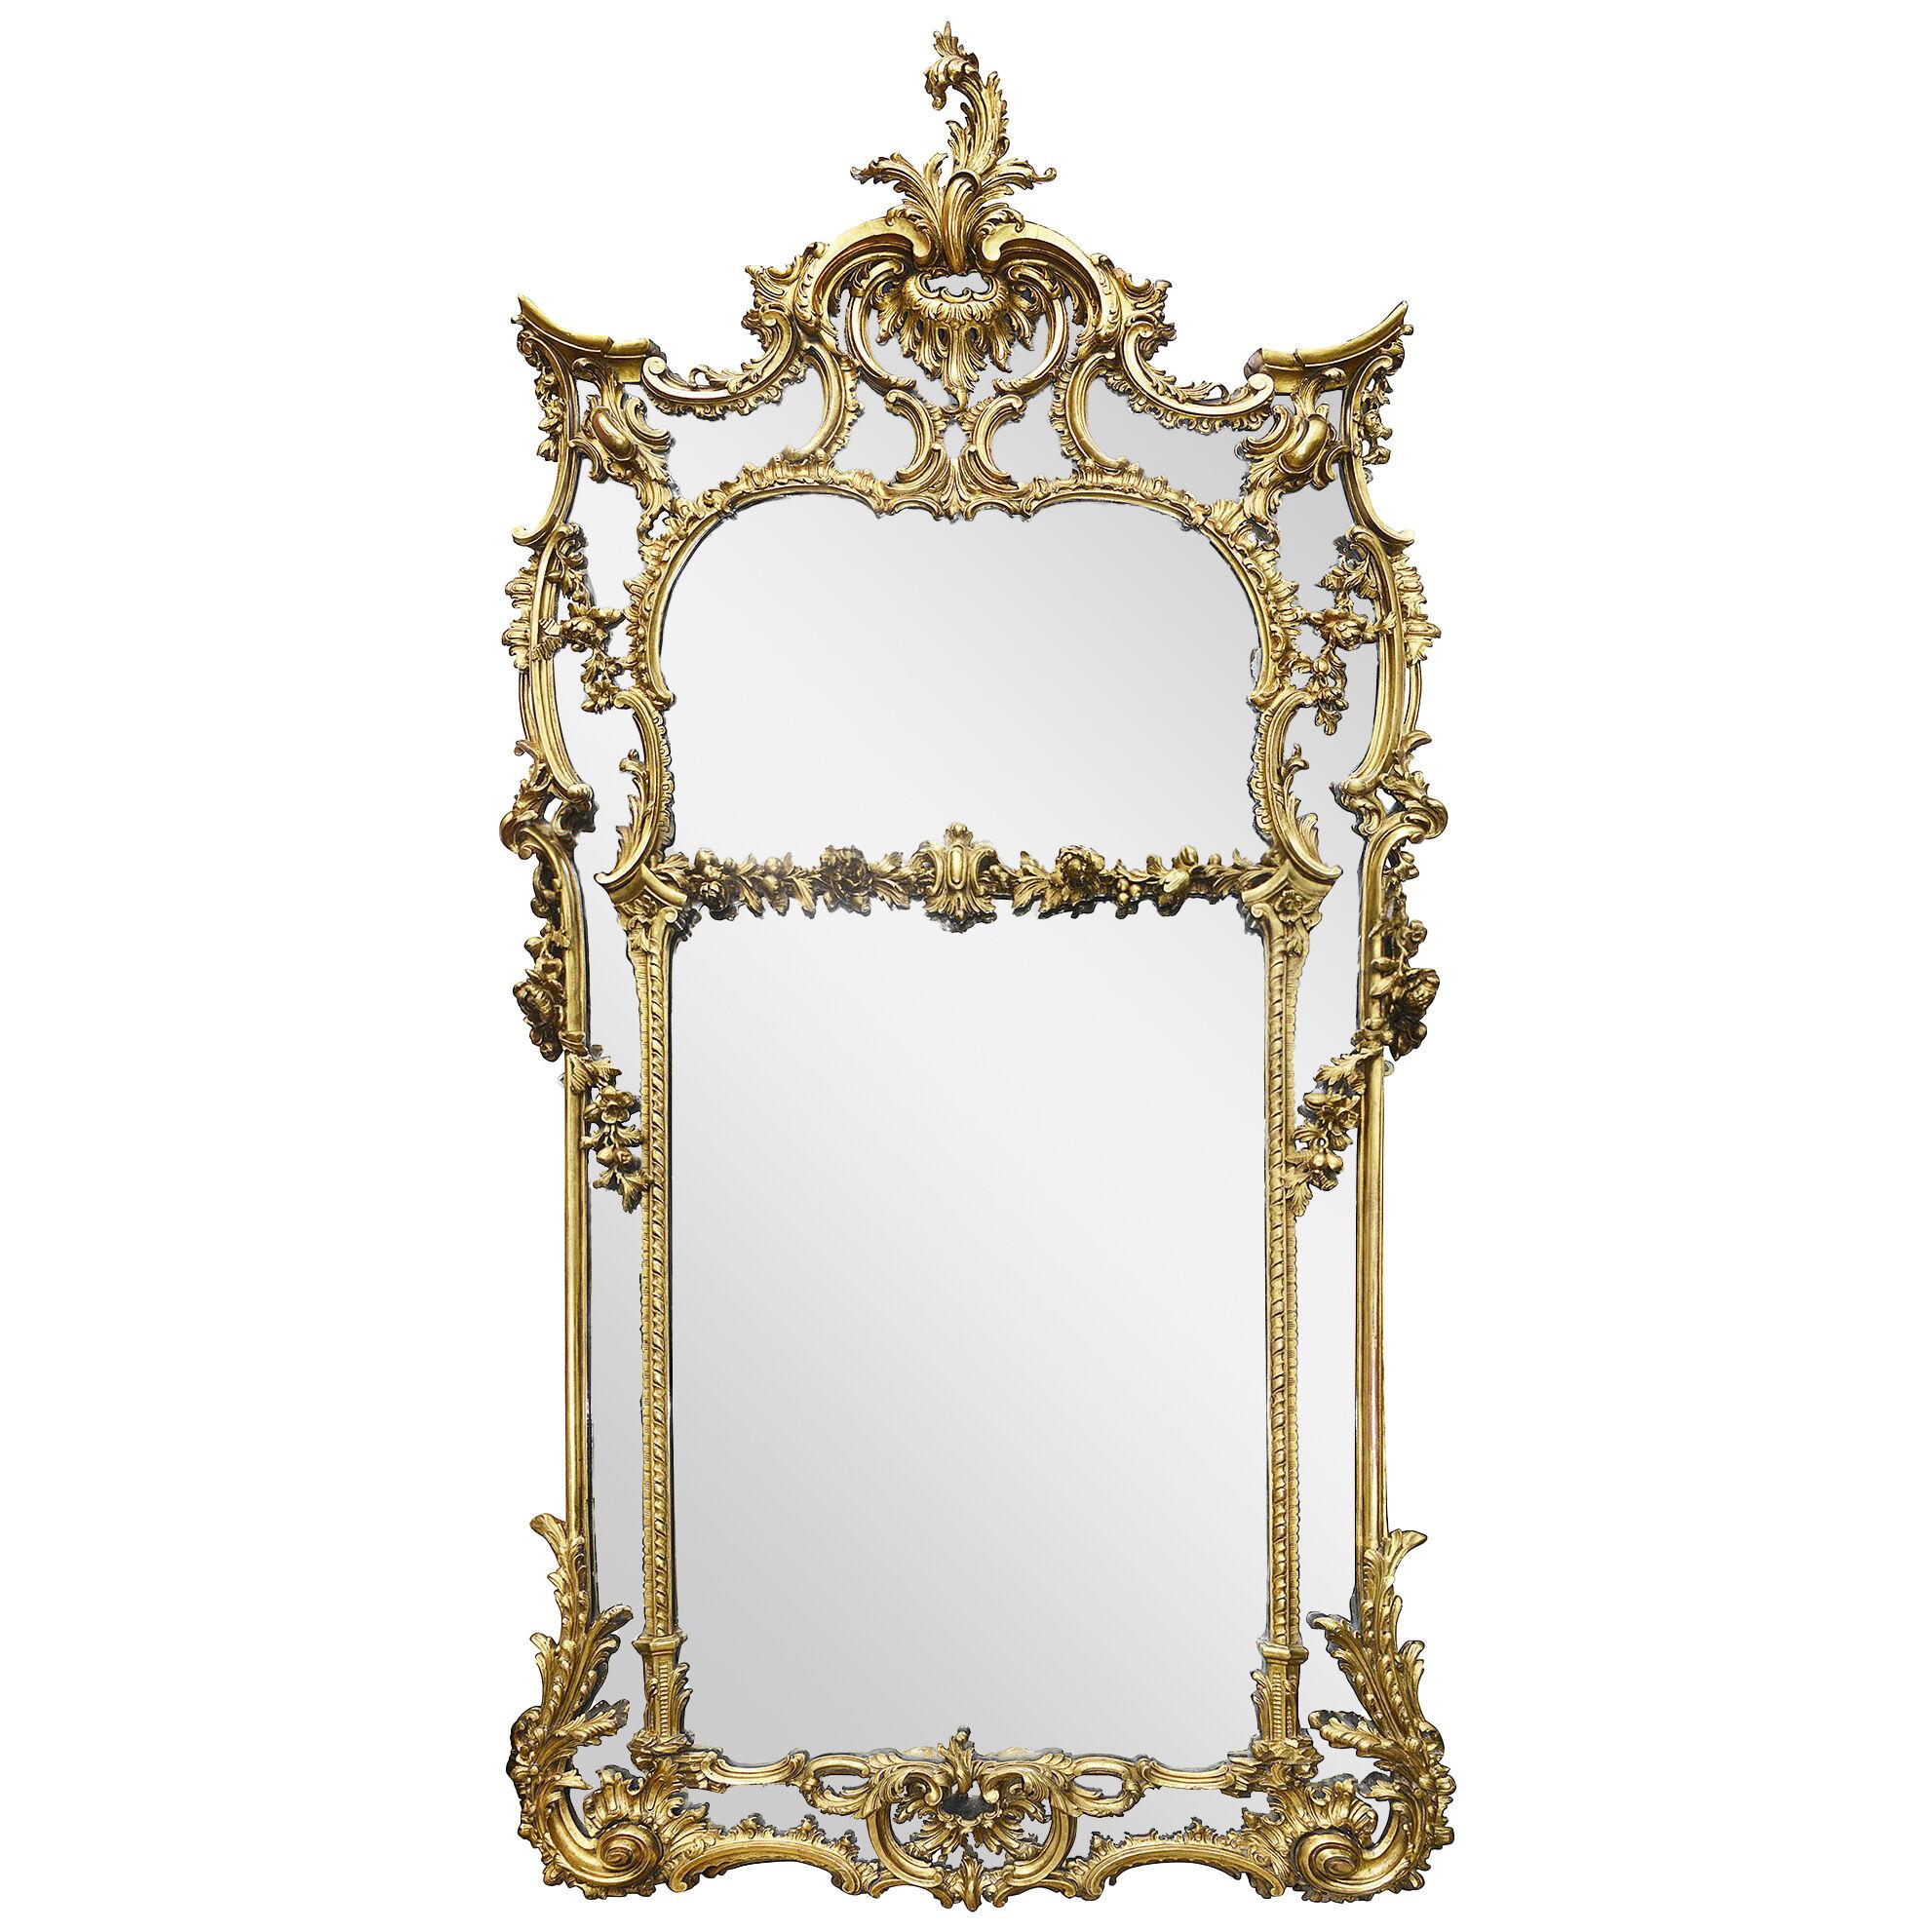 Large 18th Century Style Chippendale influenced carved giltwood wall mirror.